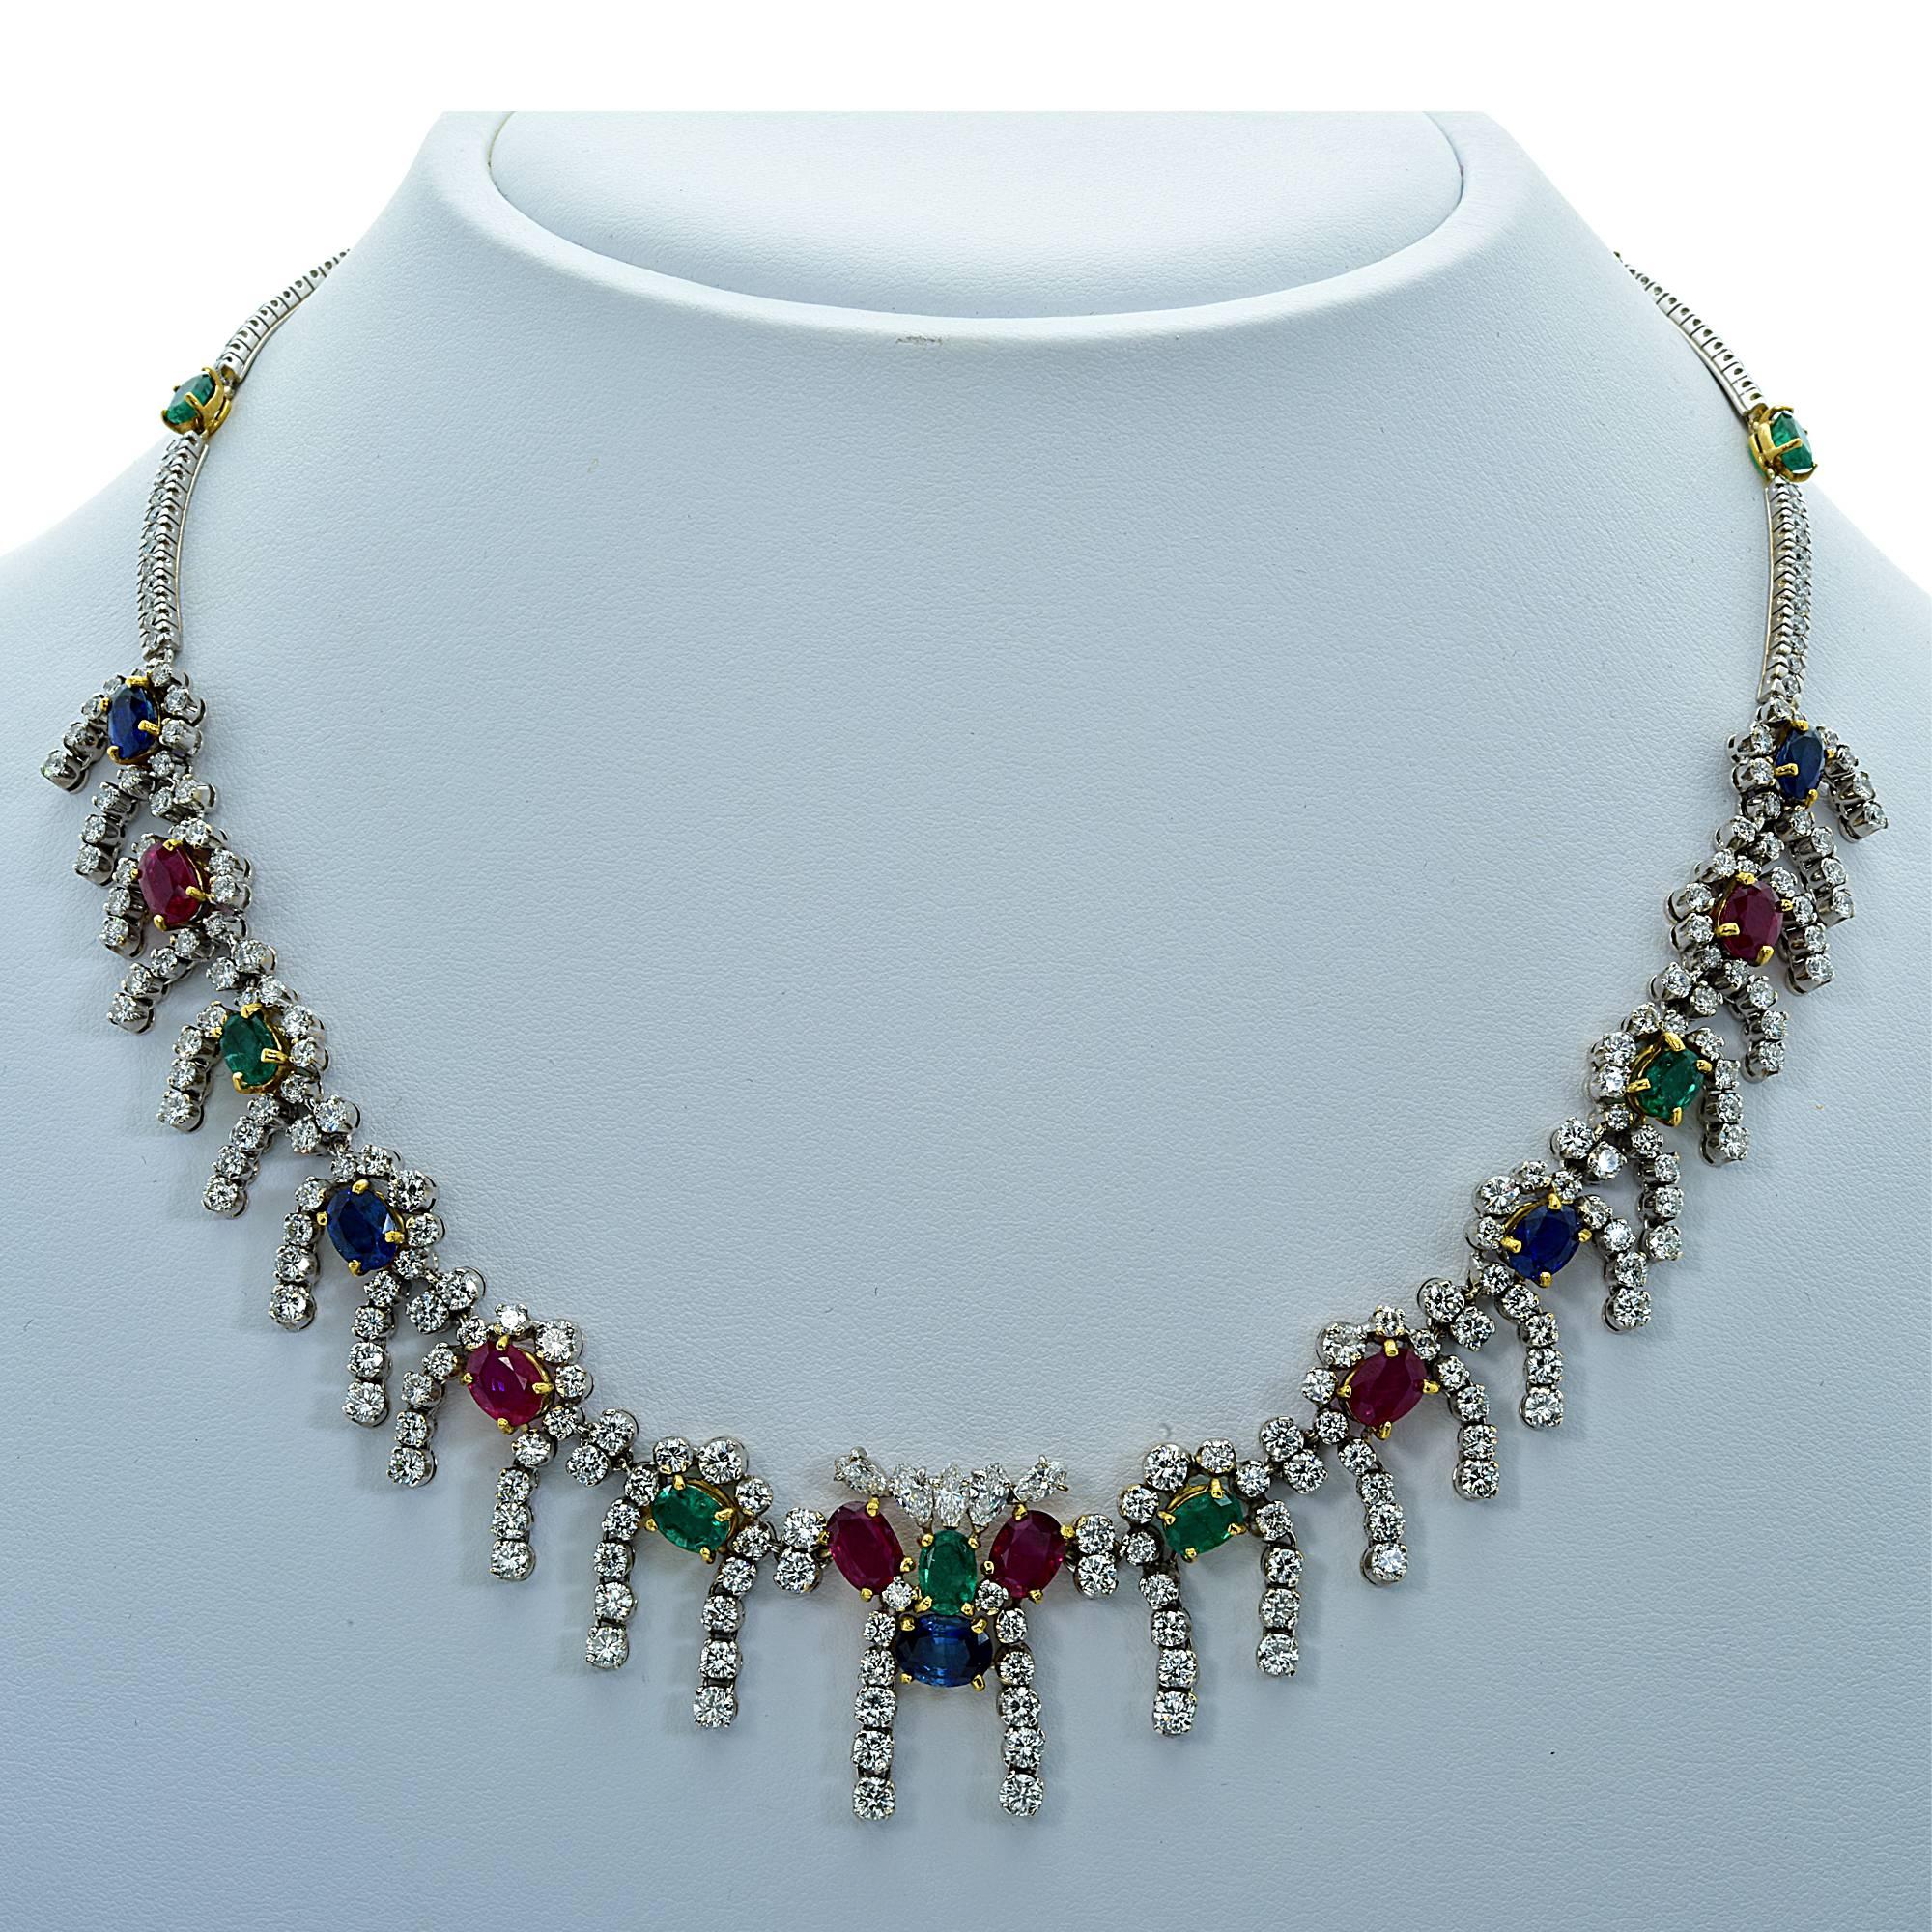 18k white and yellow gold necklace featuring 268 round brilliant and marquise cut diamonds weighing approximately 11cts total, G color VS clarity. Accented by 21 Rubies, Sapphires and Emeralds weighing approximately 13cts total.

Measurements are